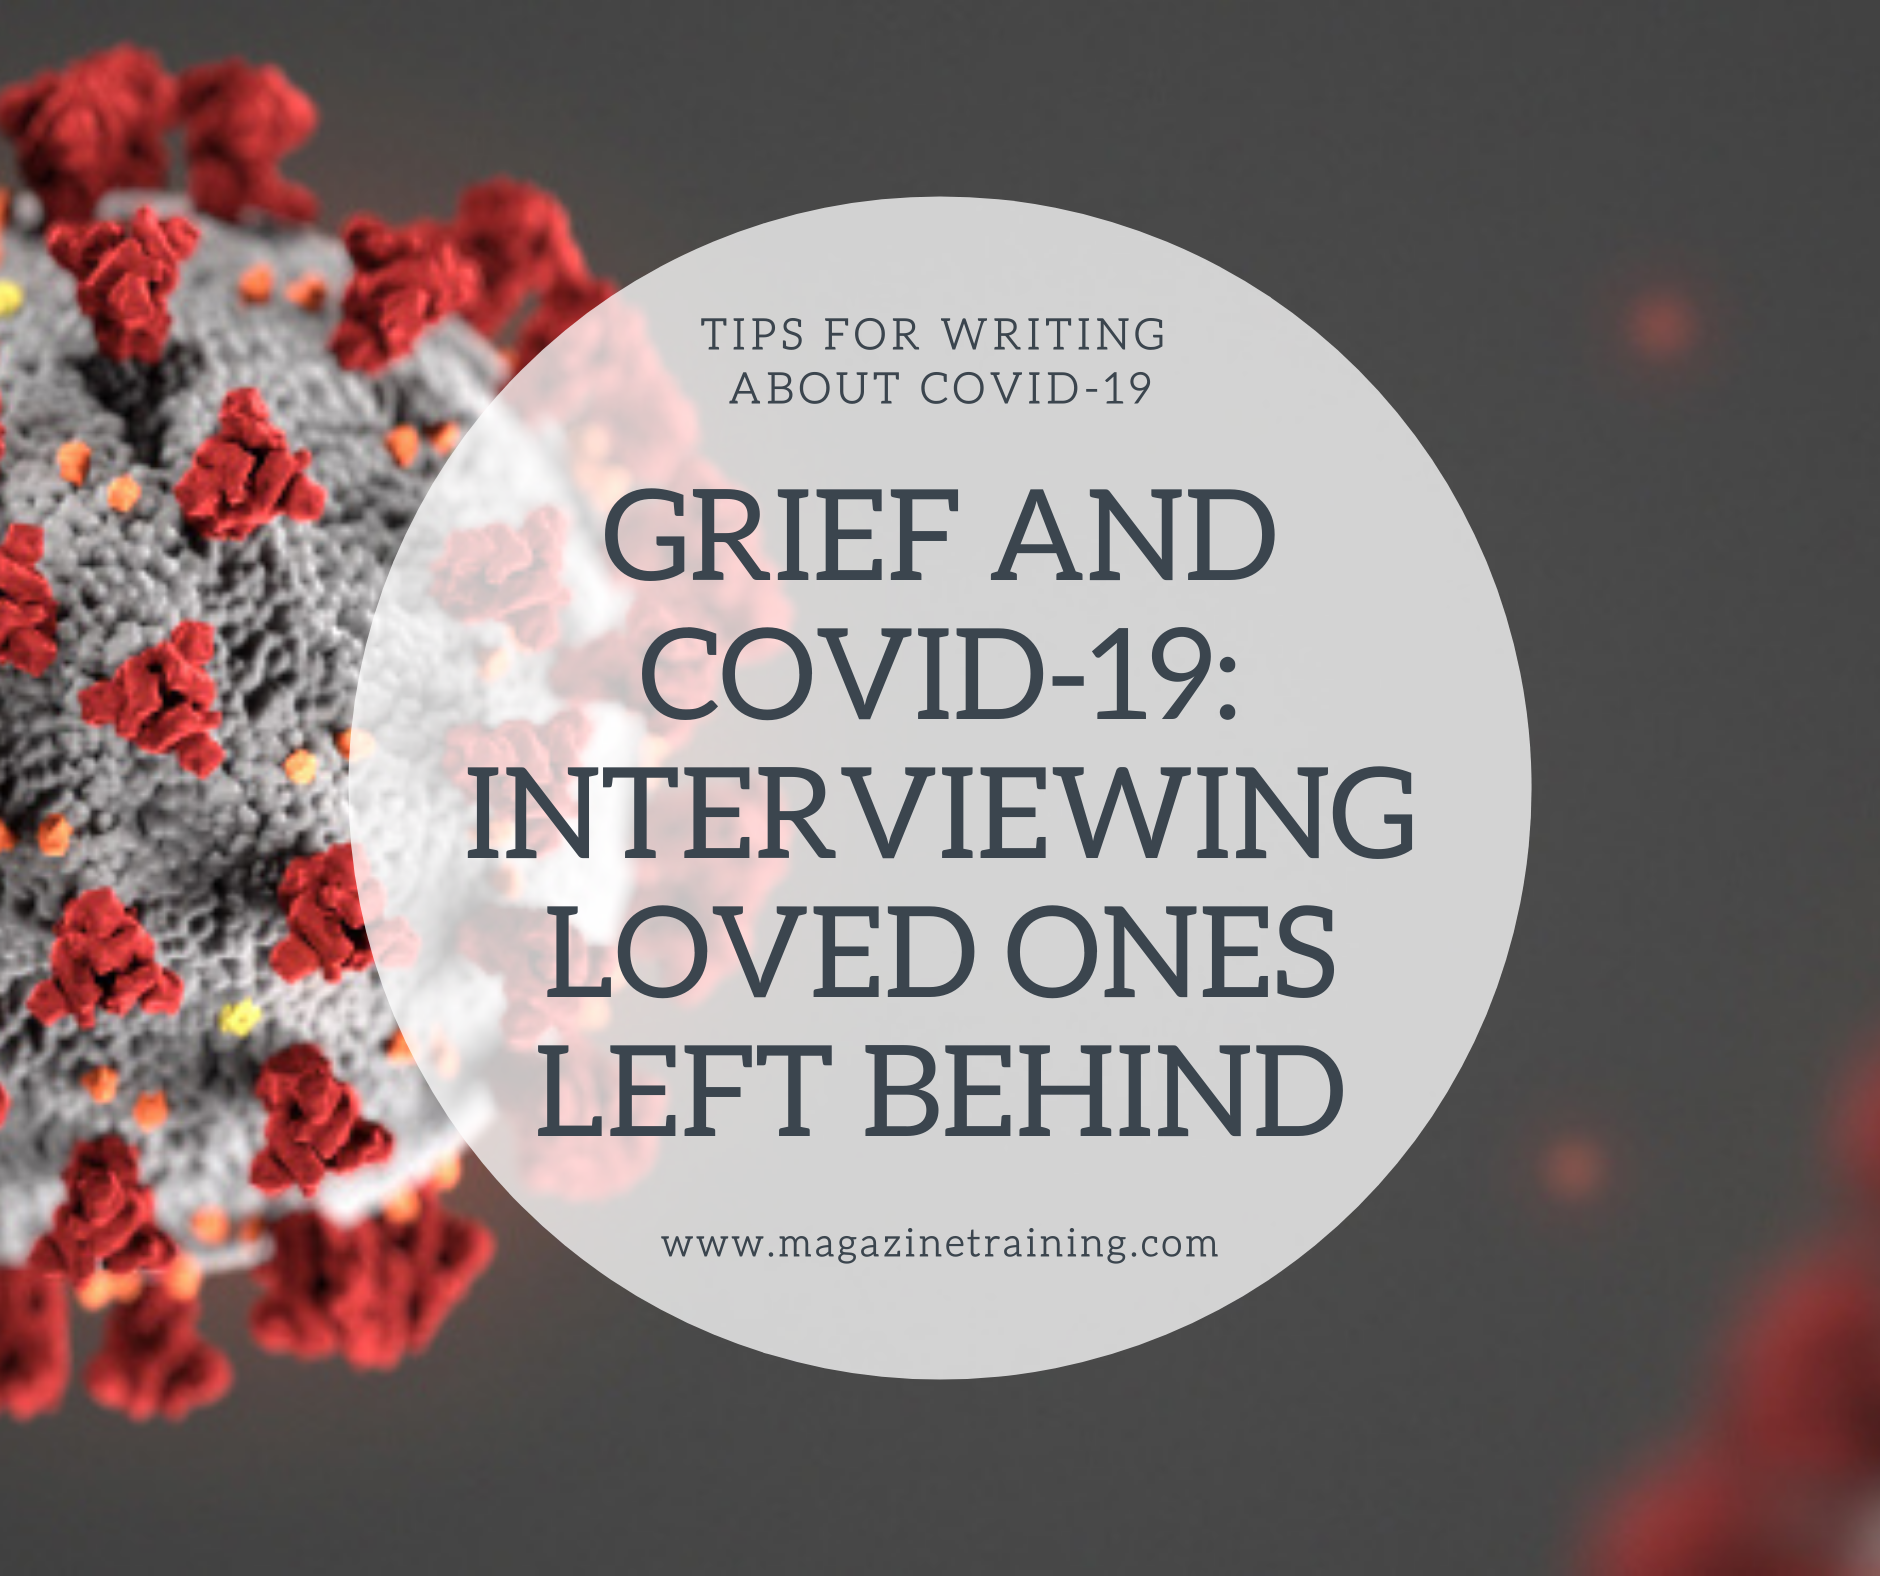 grief and COVID-19